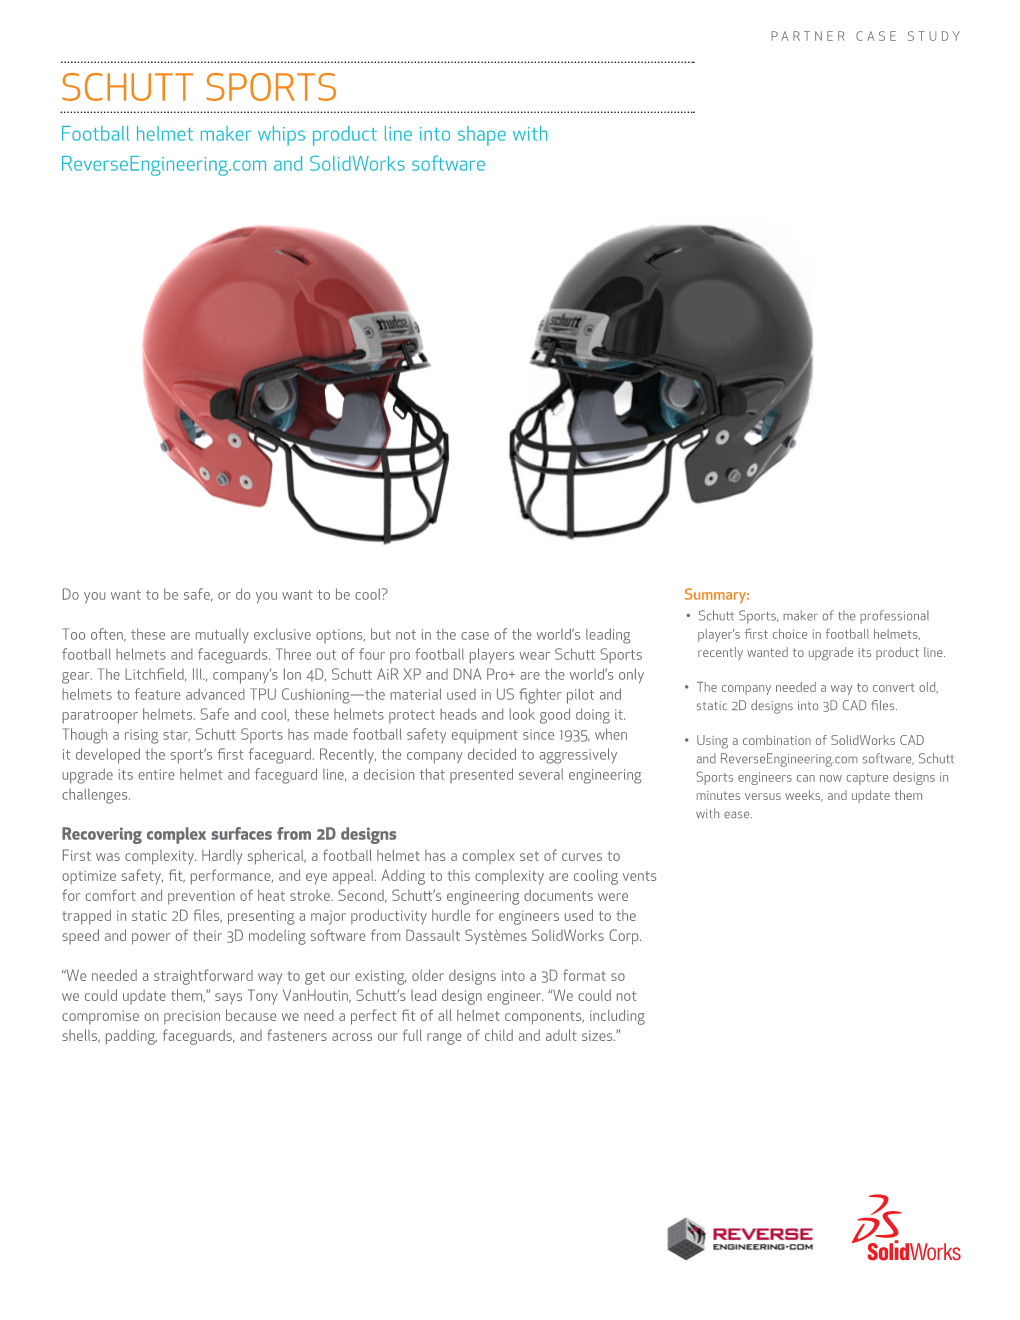 SCHUTT SPORTS Football Helmet Maker Whips Product Line Into Shape with Reverseengineering.Com and Solidworks Software